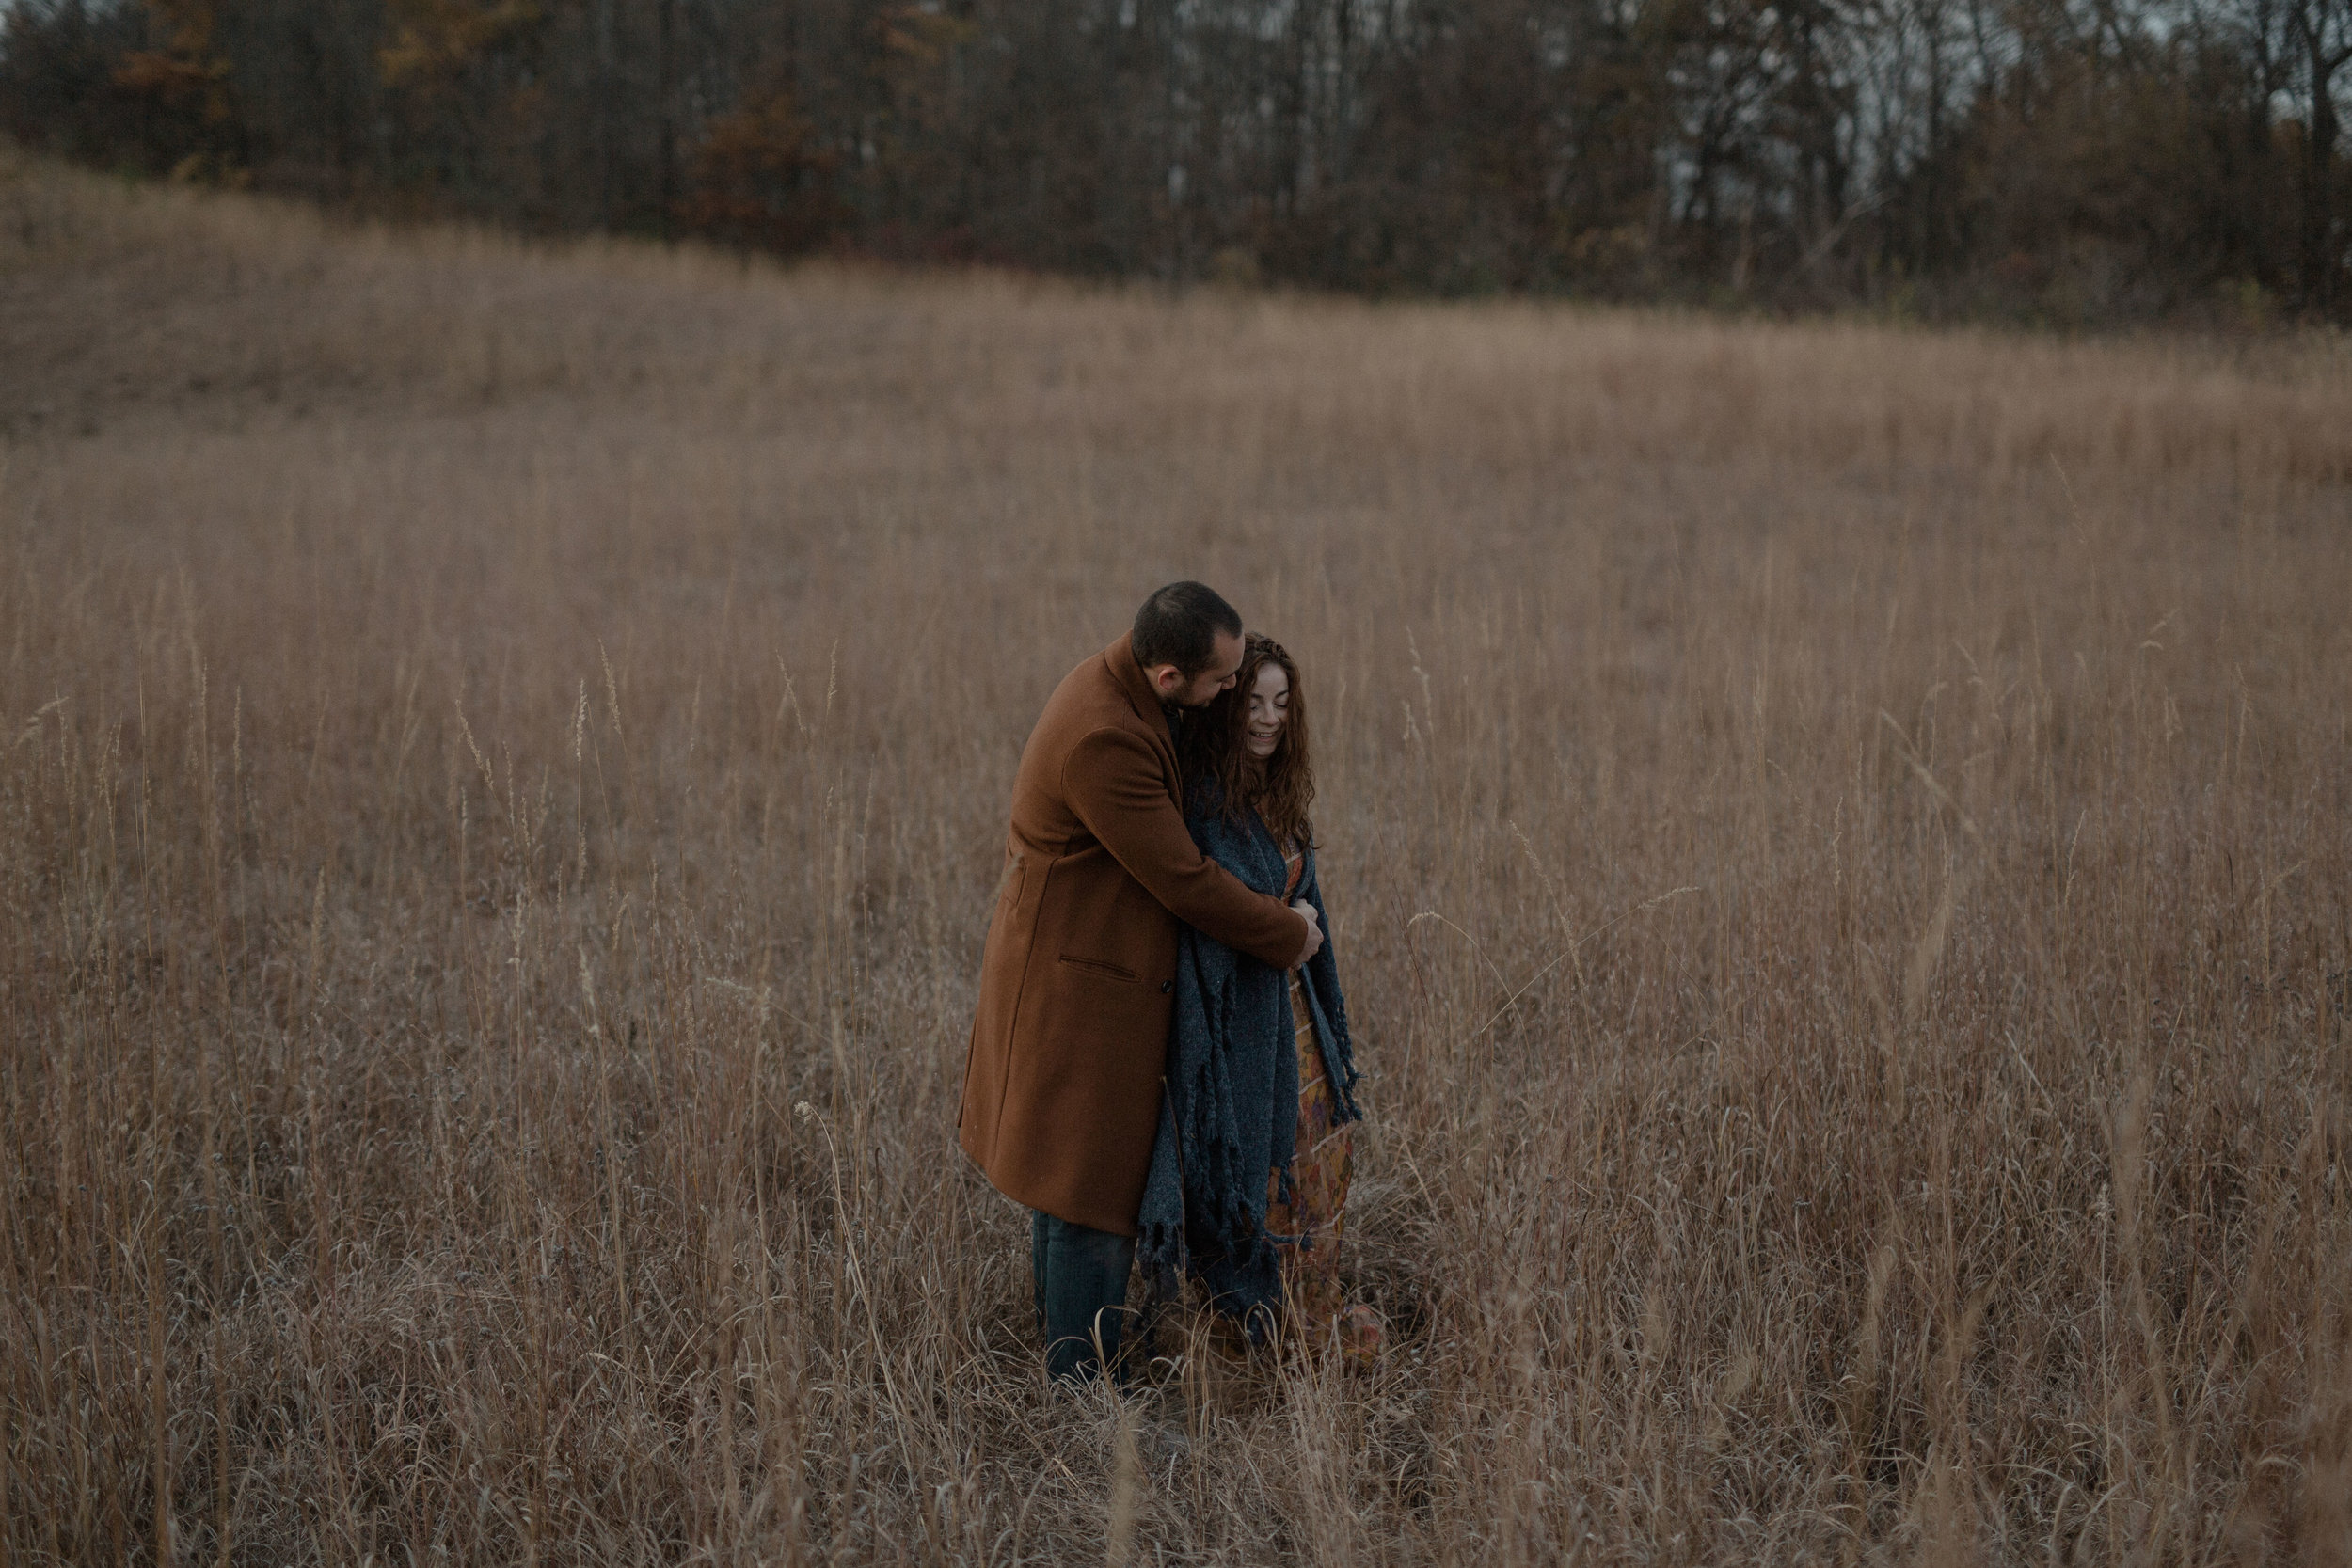 autumn engagement session inspiration. fall engagement session colors. ohio engagement photographer. bohemian floral style. moody engagement photography. sarah rose photography. i am sarah rose.